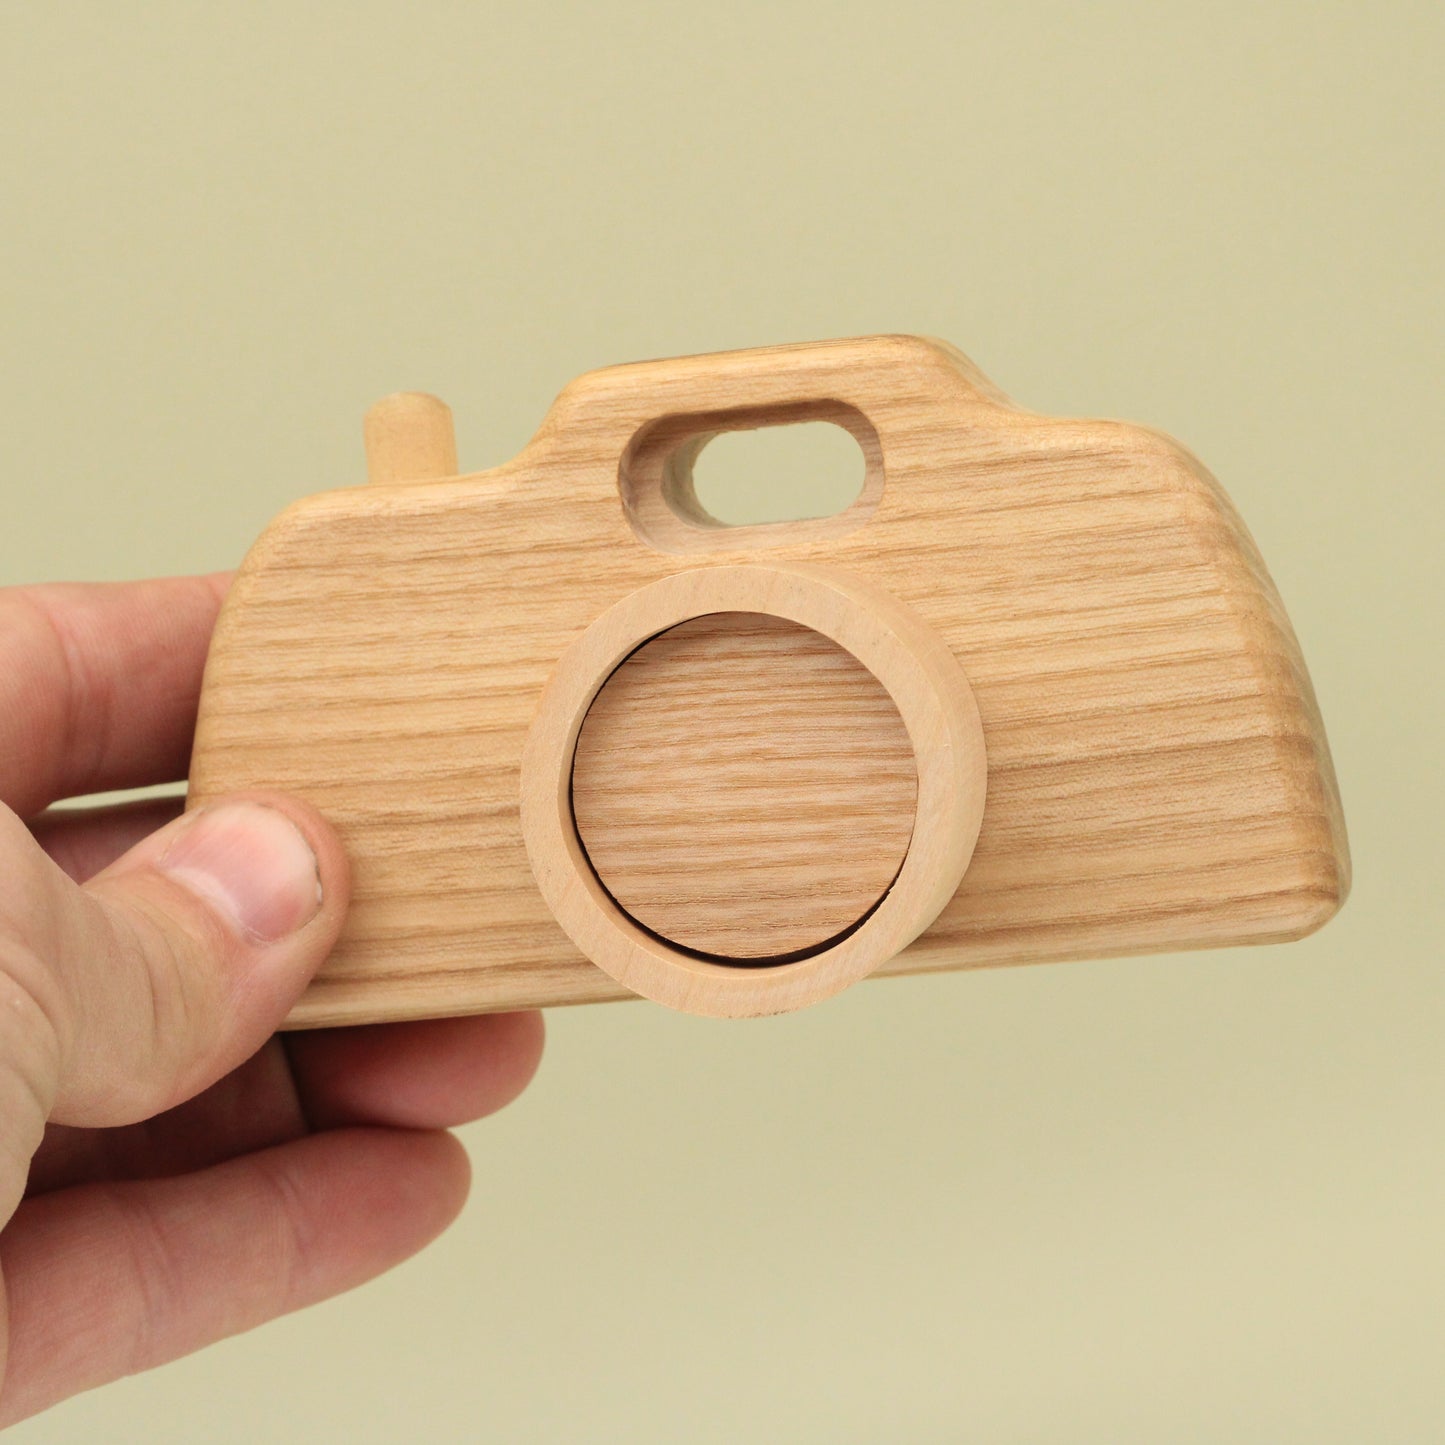 Lotes Toys Wooden Camera III